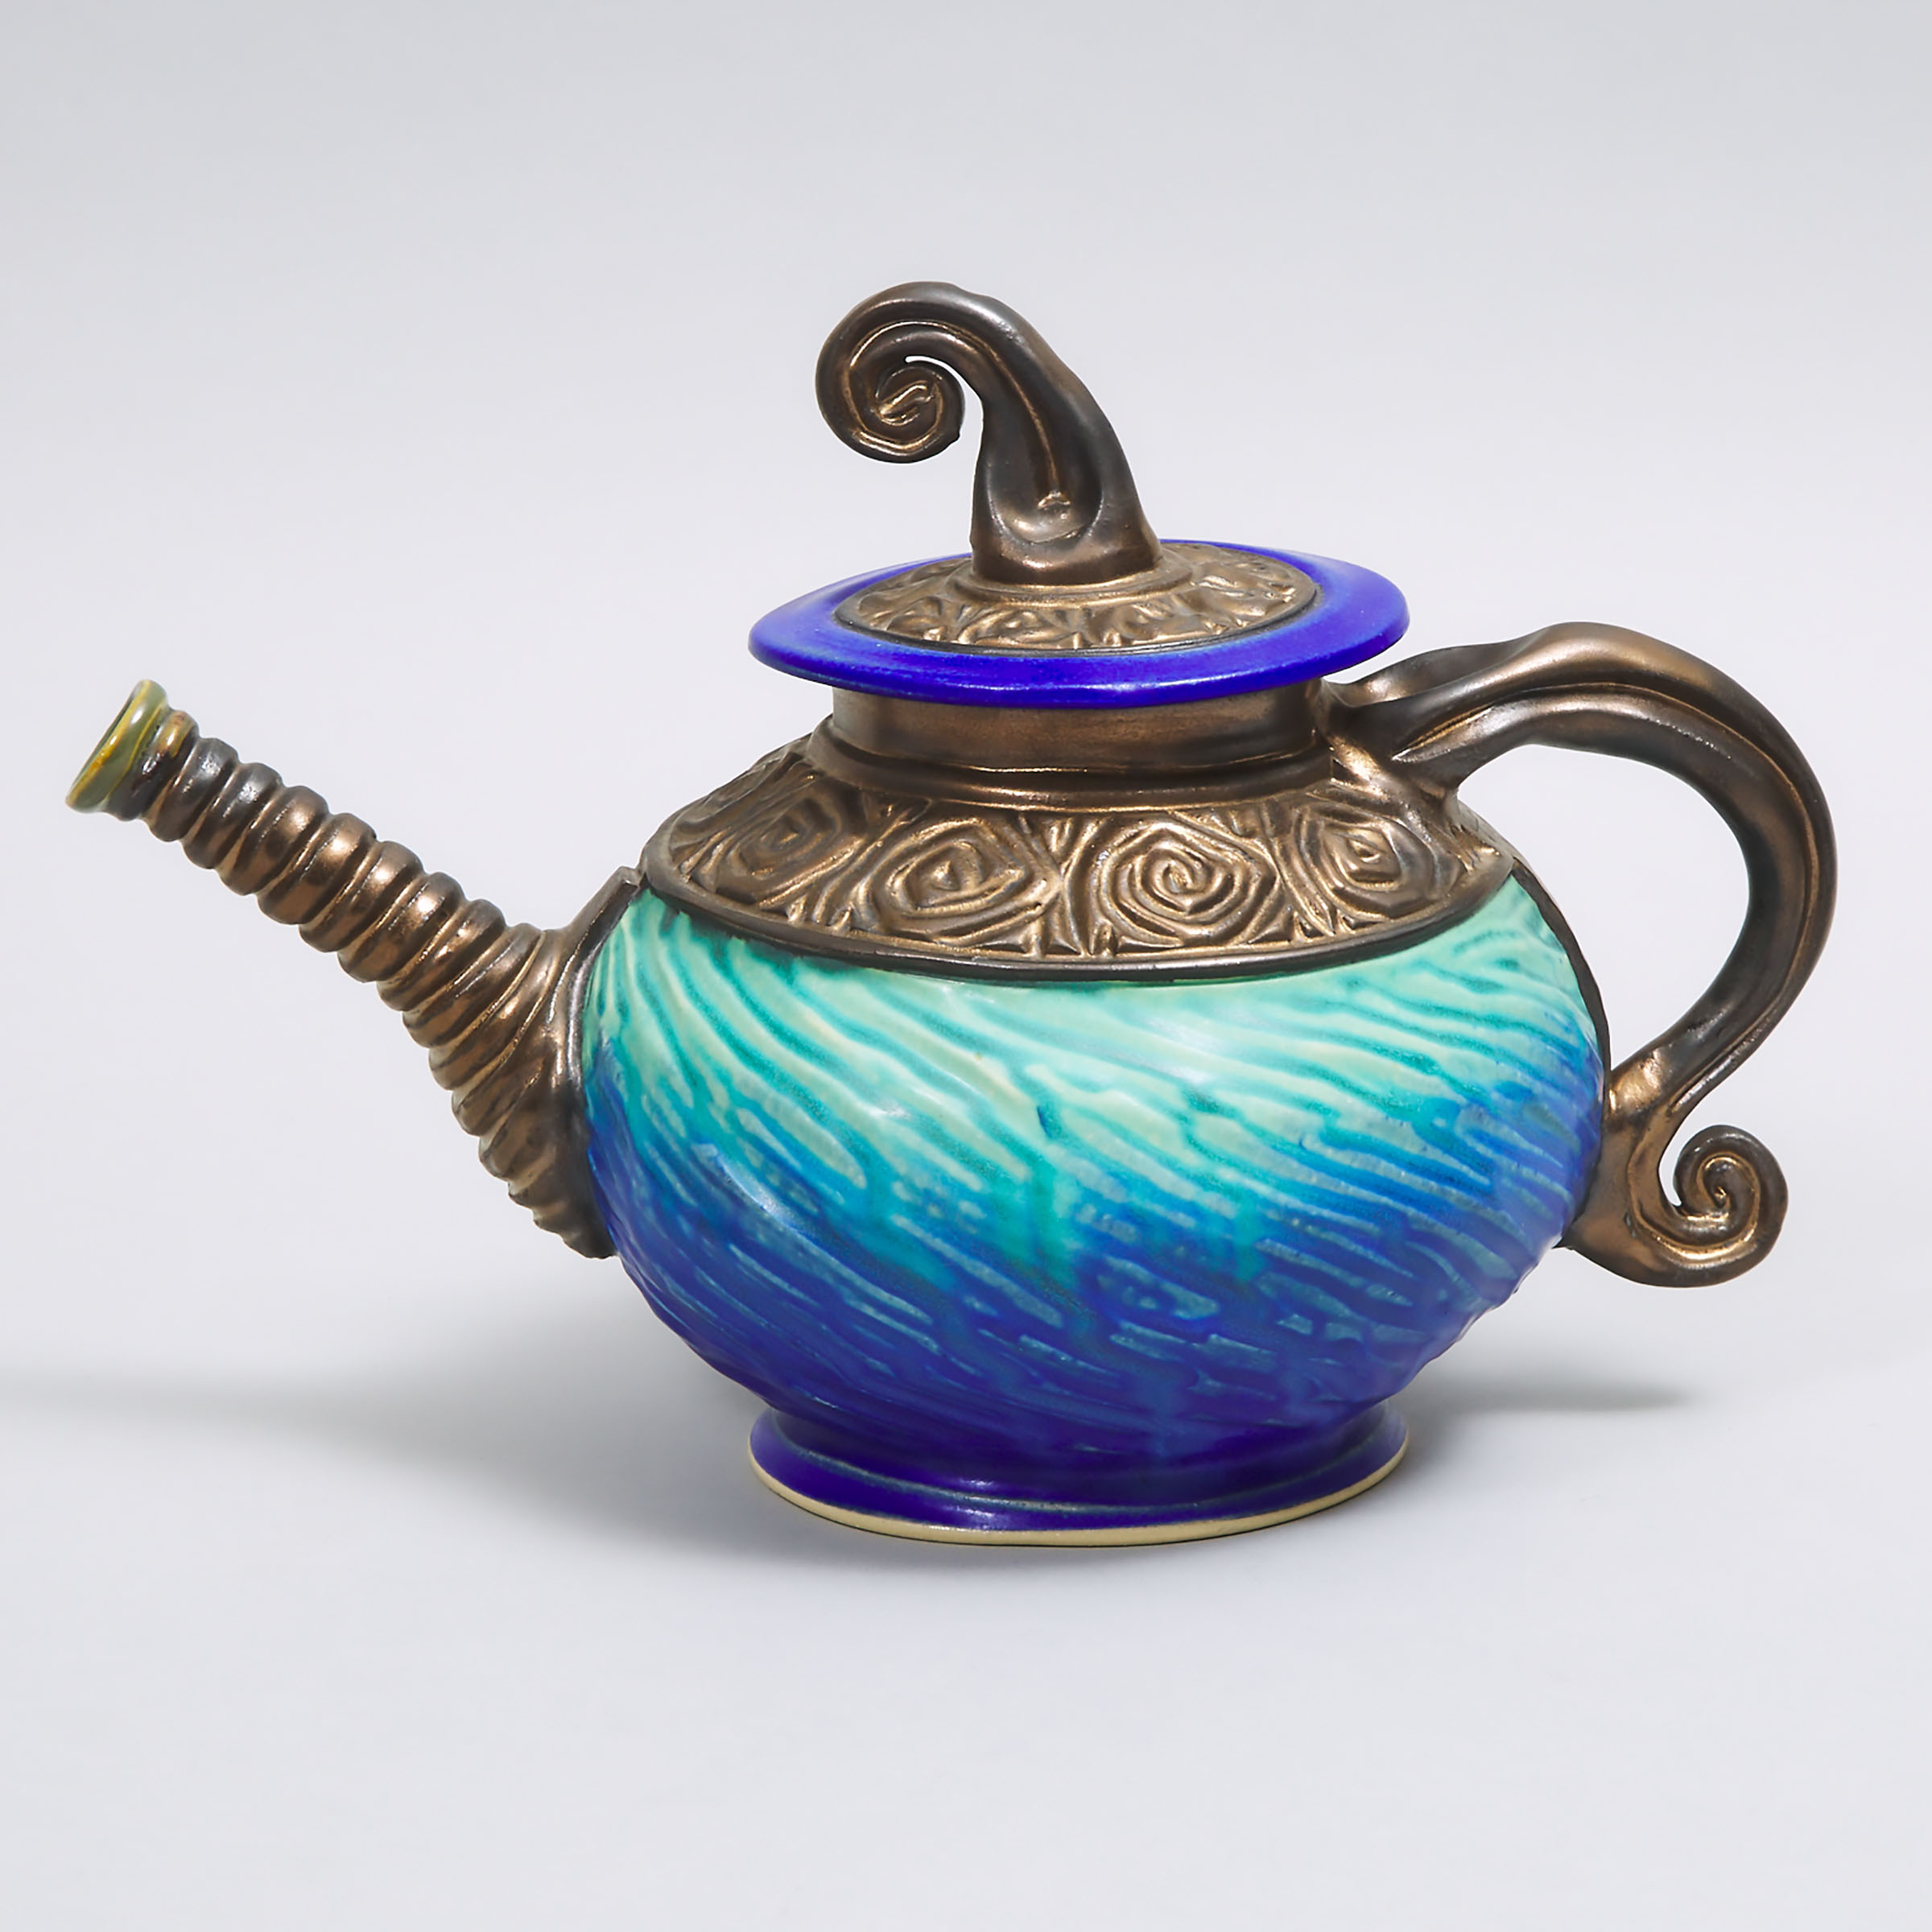 Johnathan Bullock (Canadian, b.1968), Carved Blue and Bronze Glazed Teapot, 1990-95